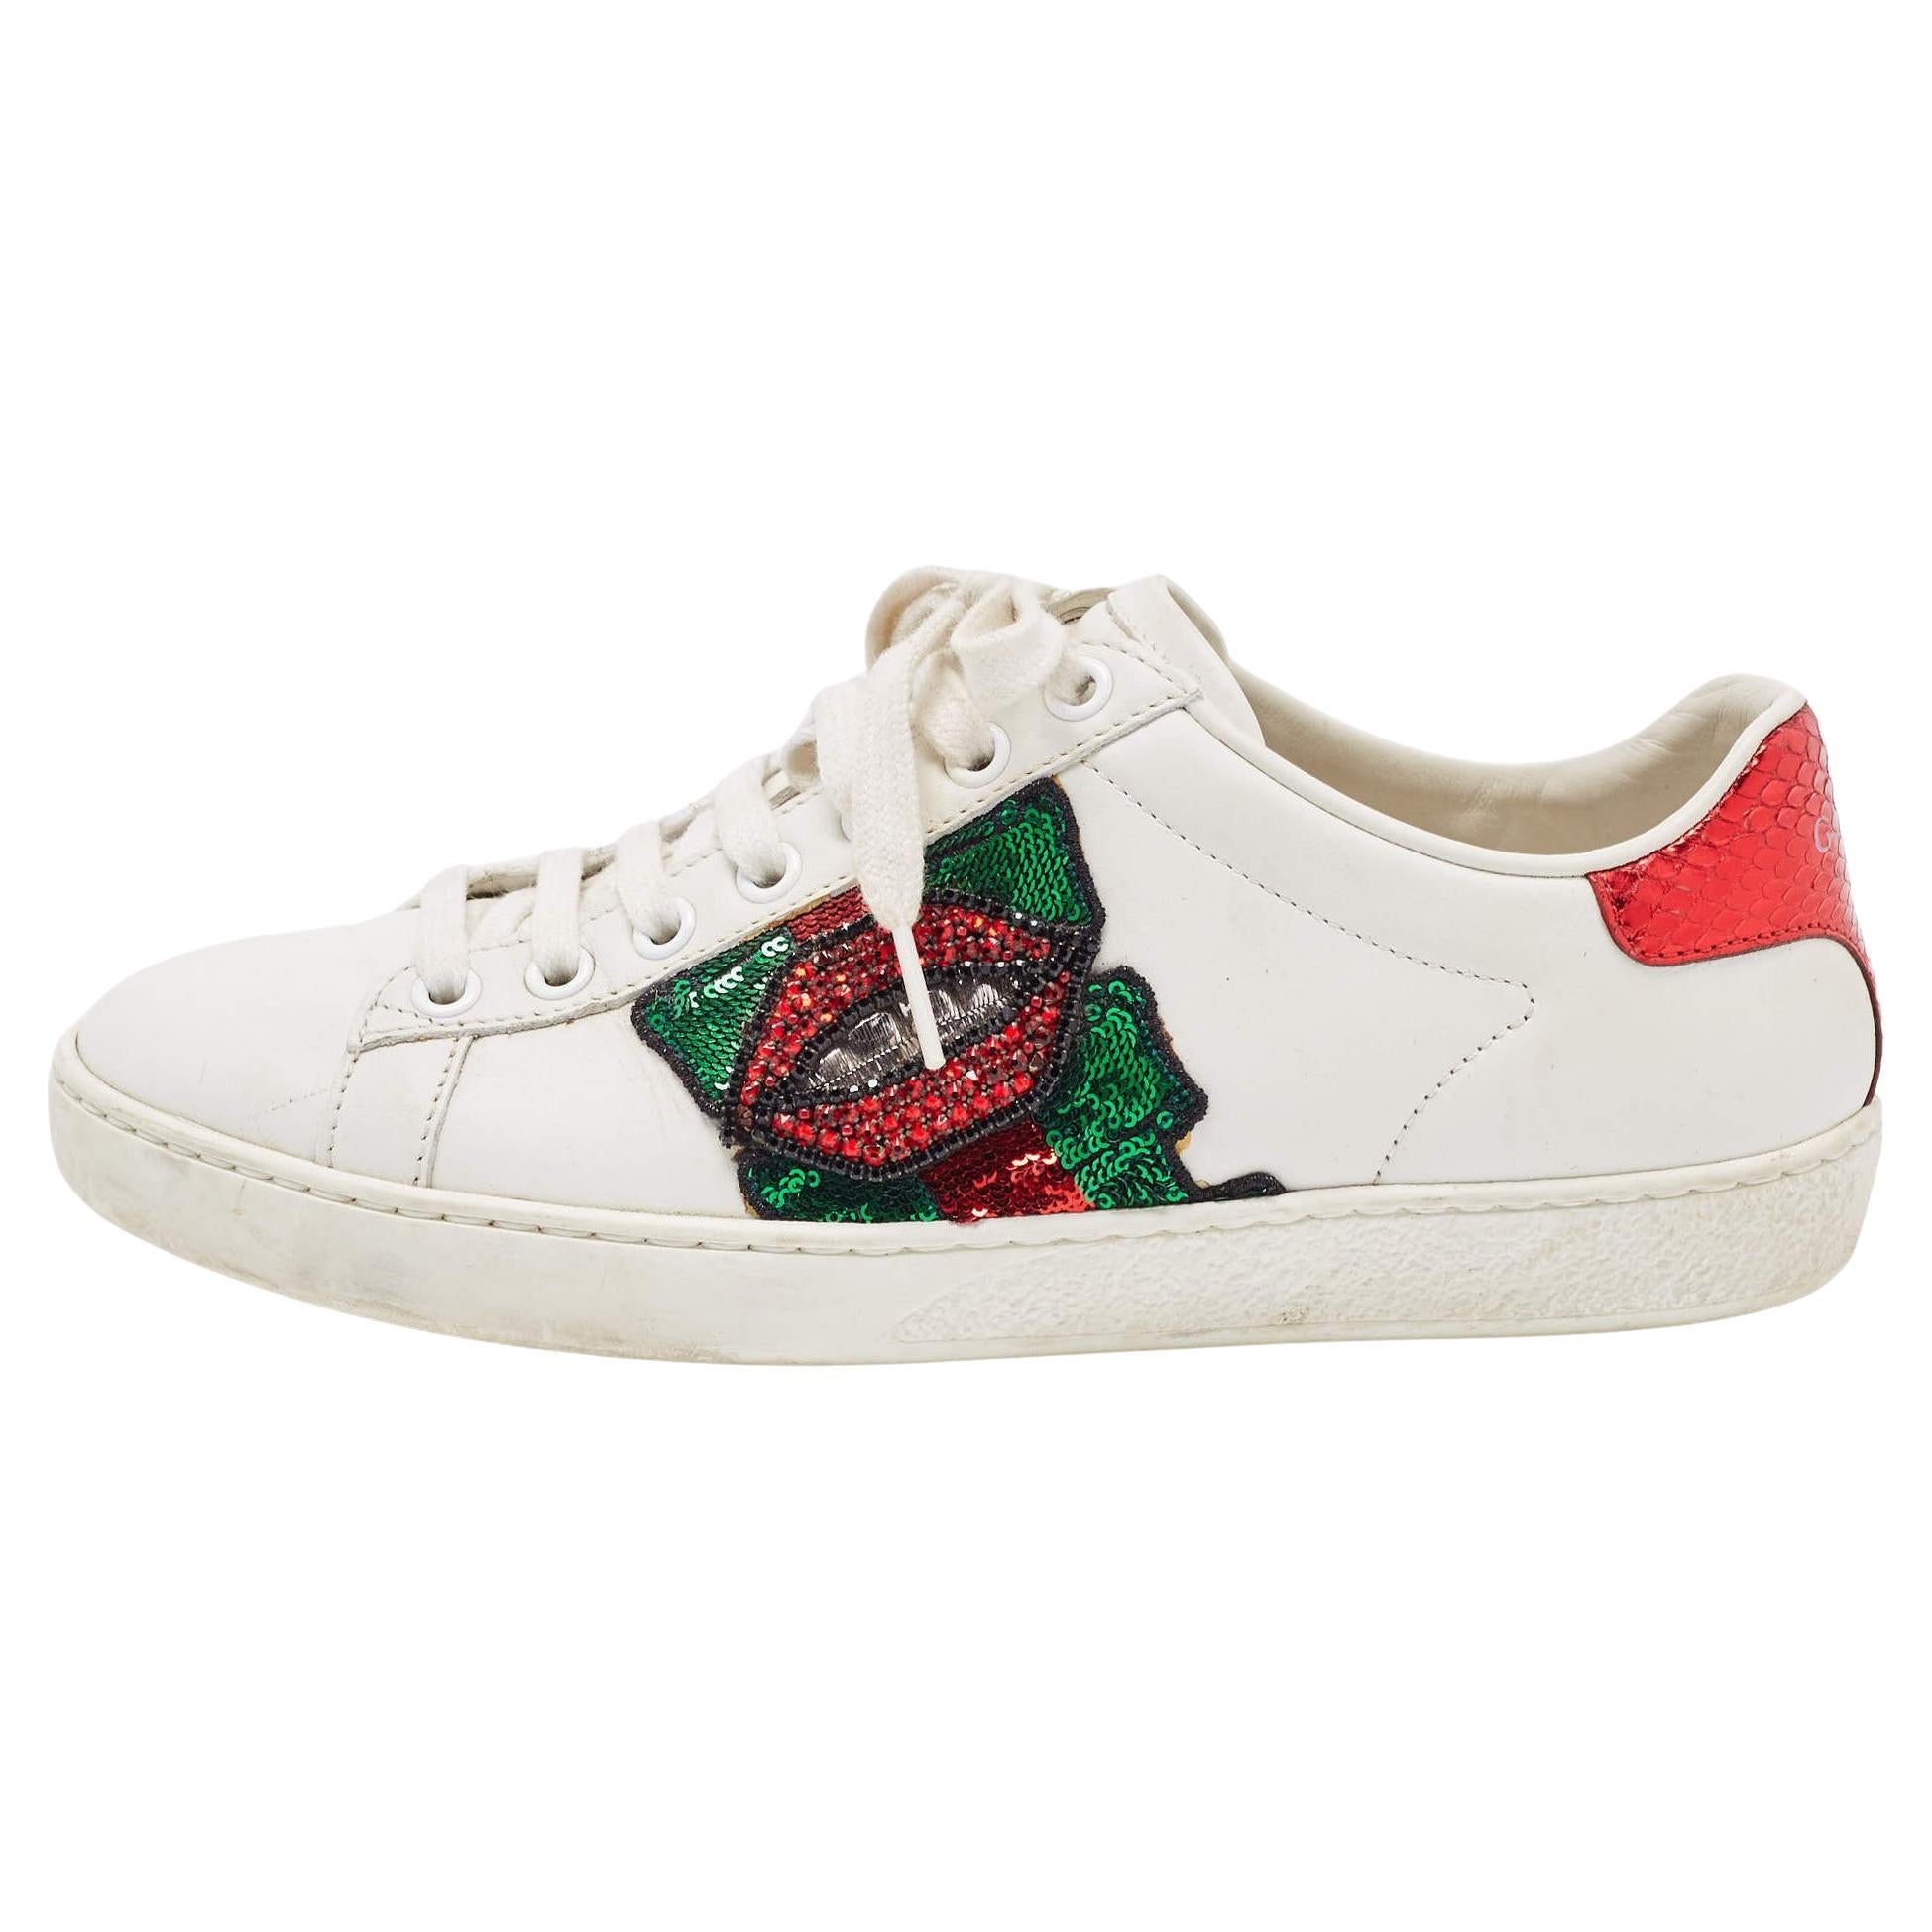 Gucci White Leather Embellished Lip Ace Sneakers Size 36 For Sale